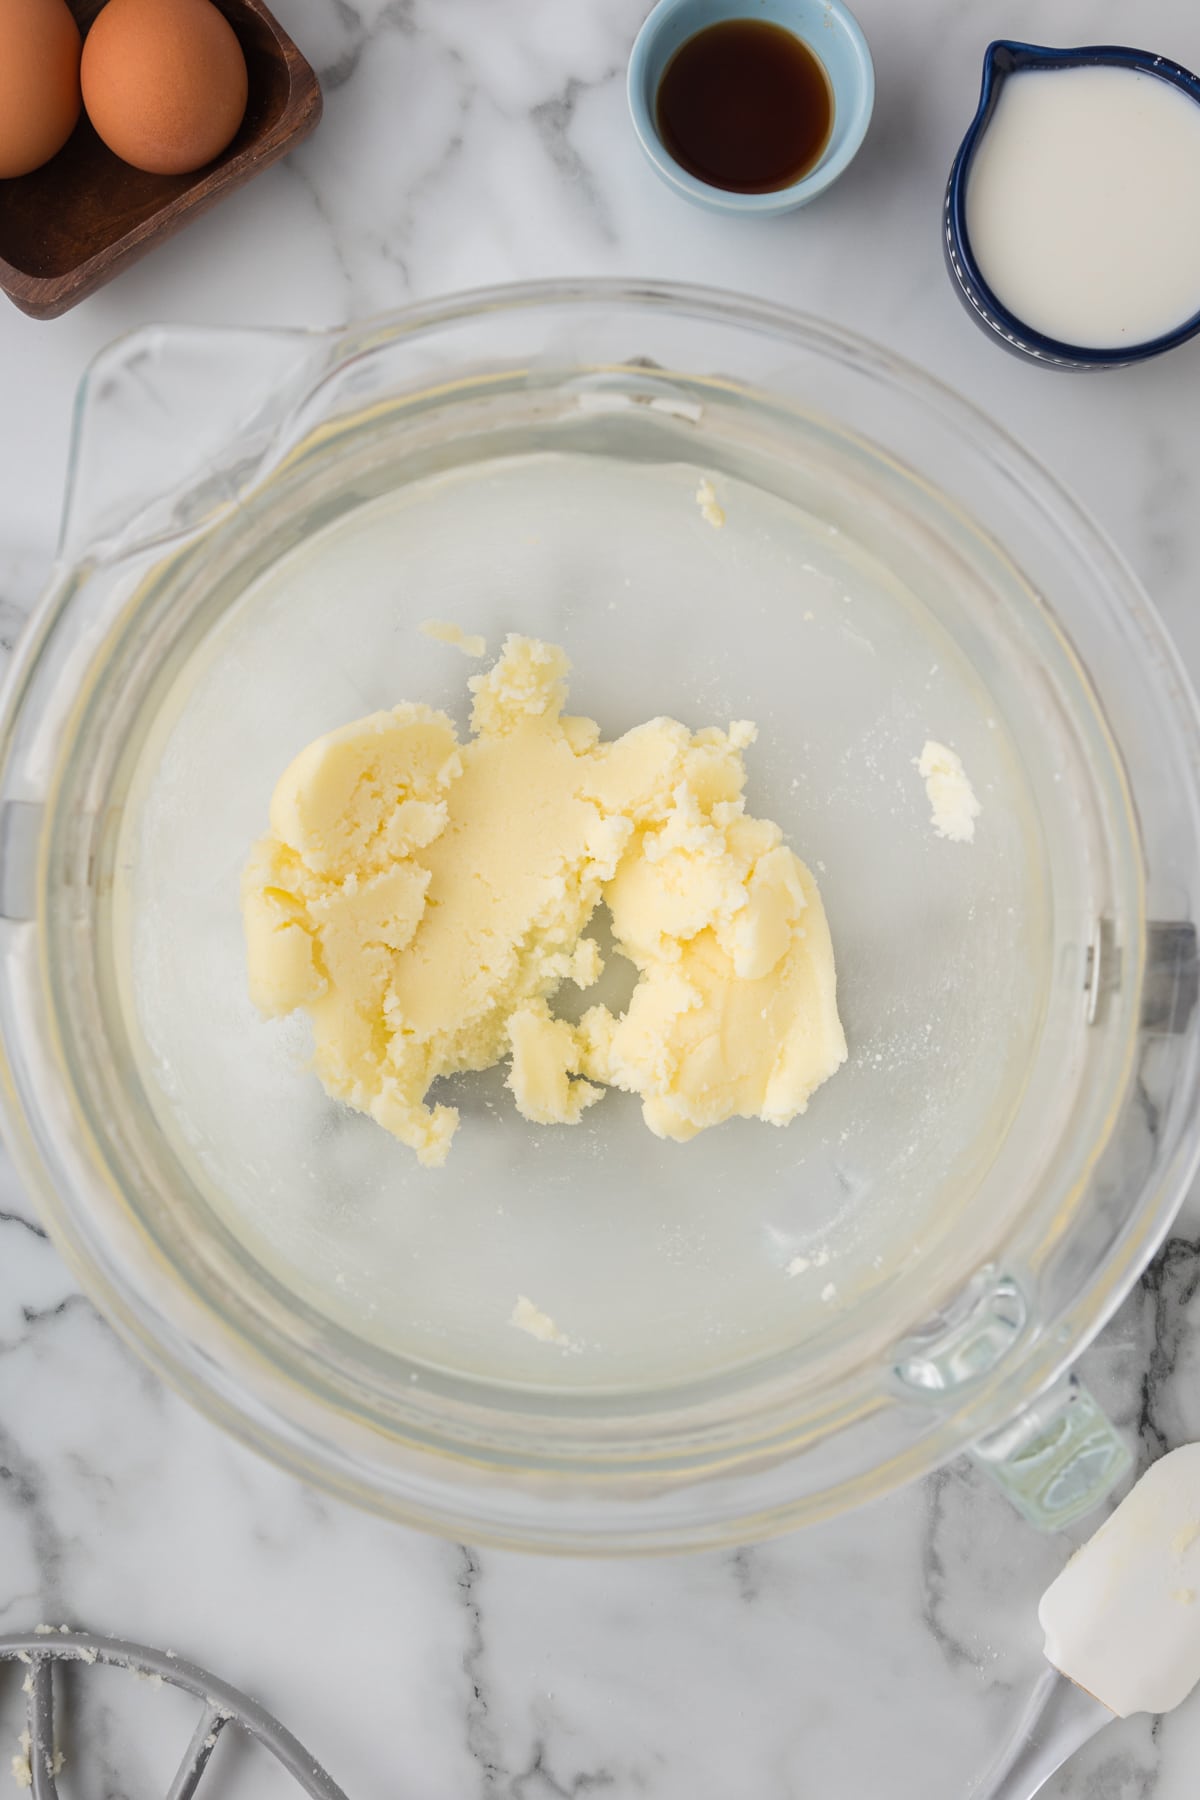 Butter in a glass bowl next to eggs and other ingredients.